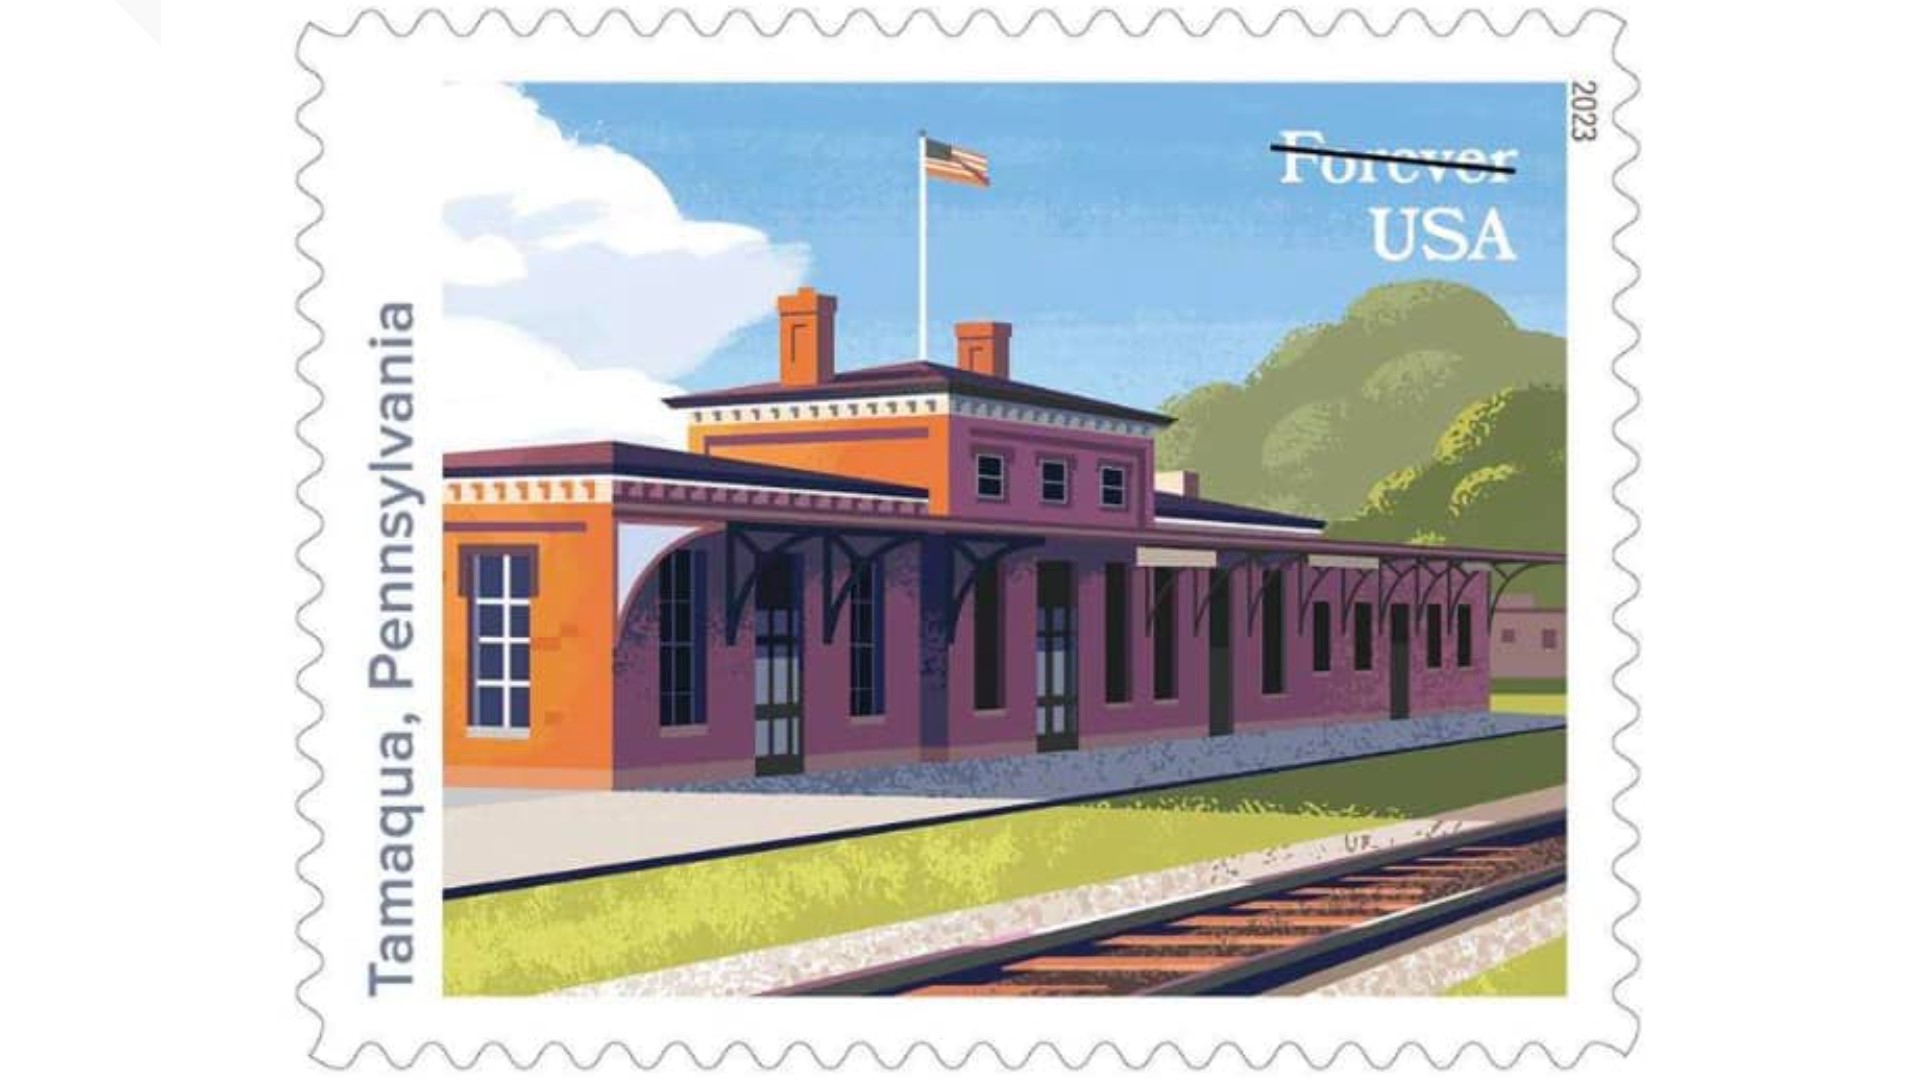 A local landmark in Tamaqua is putting Schuylkill County on the map — and on a stamp.